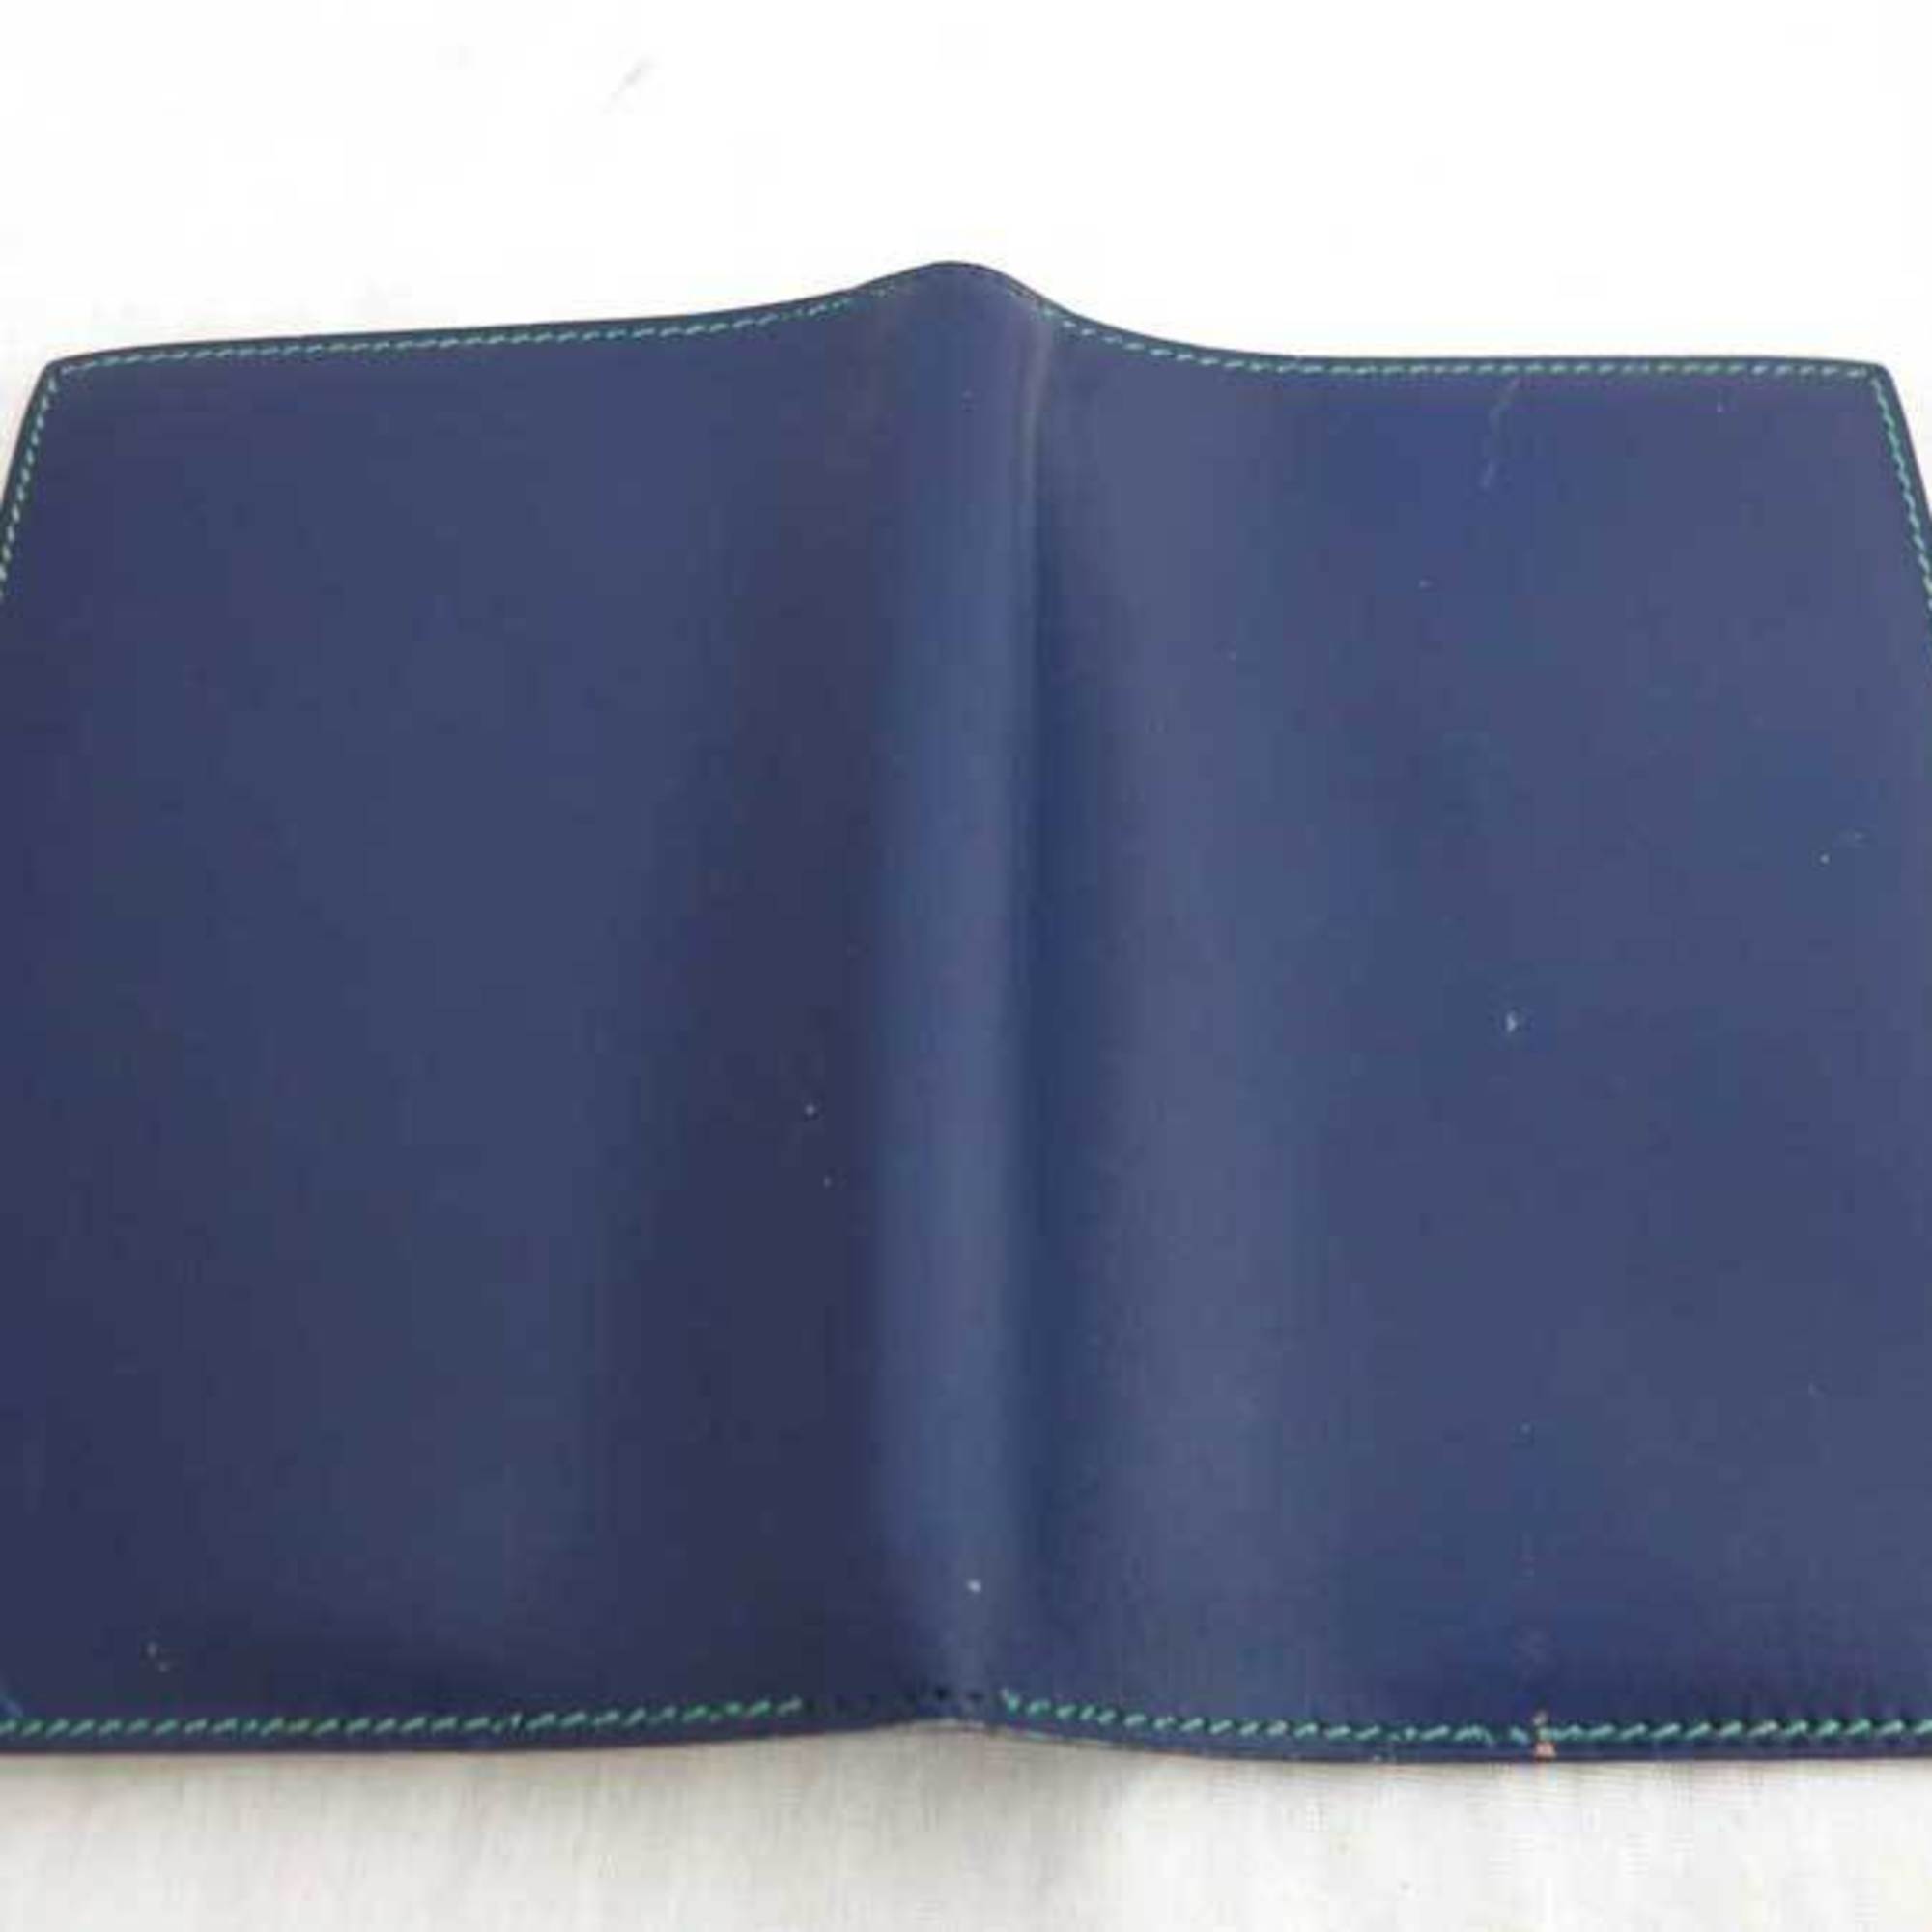 Hermes HERMES notebook cover leather navy blue x green unisex